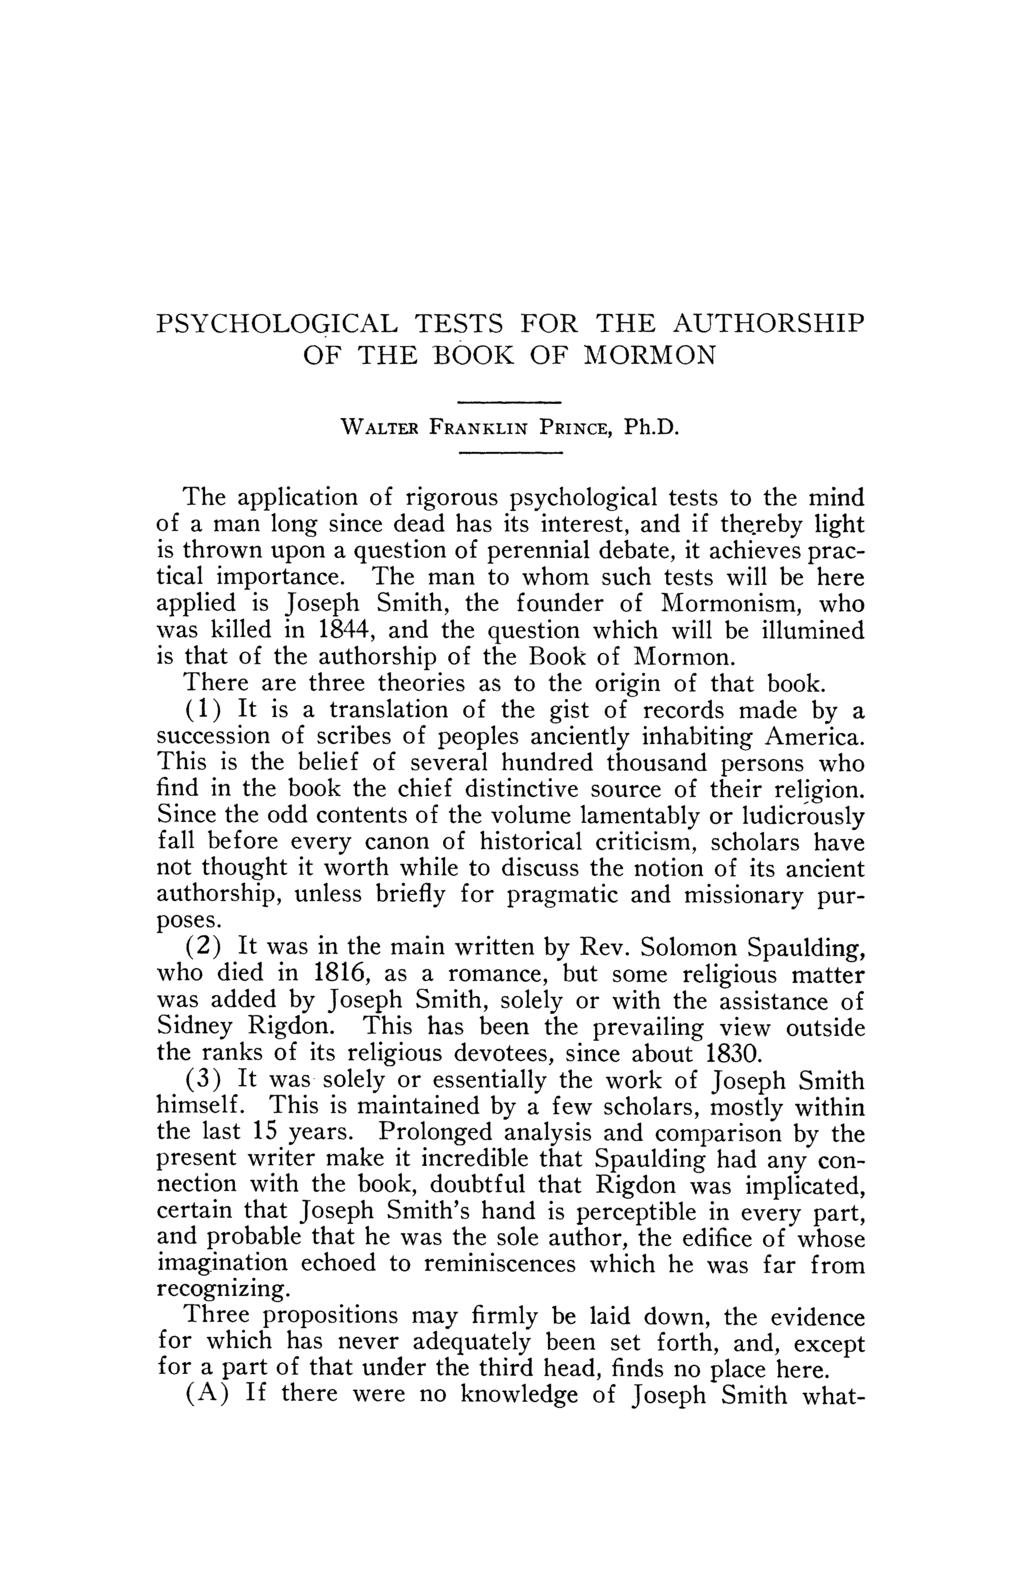 PSYCHOLOGICAL TESTS FOR THE AUTHORSHIP OF THE BOOK OF MORMON WALTER FRANKLIN PRINCE, Ph.D.